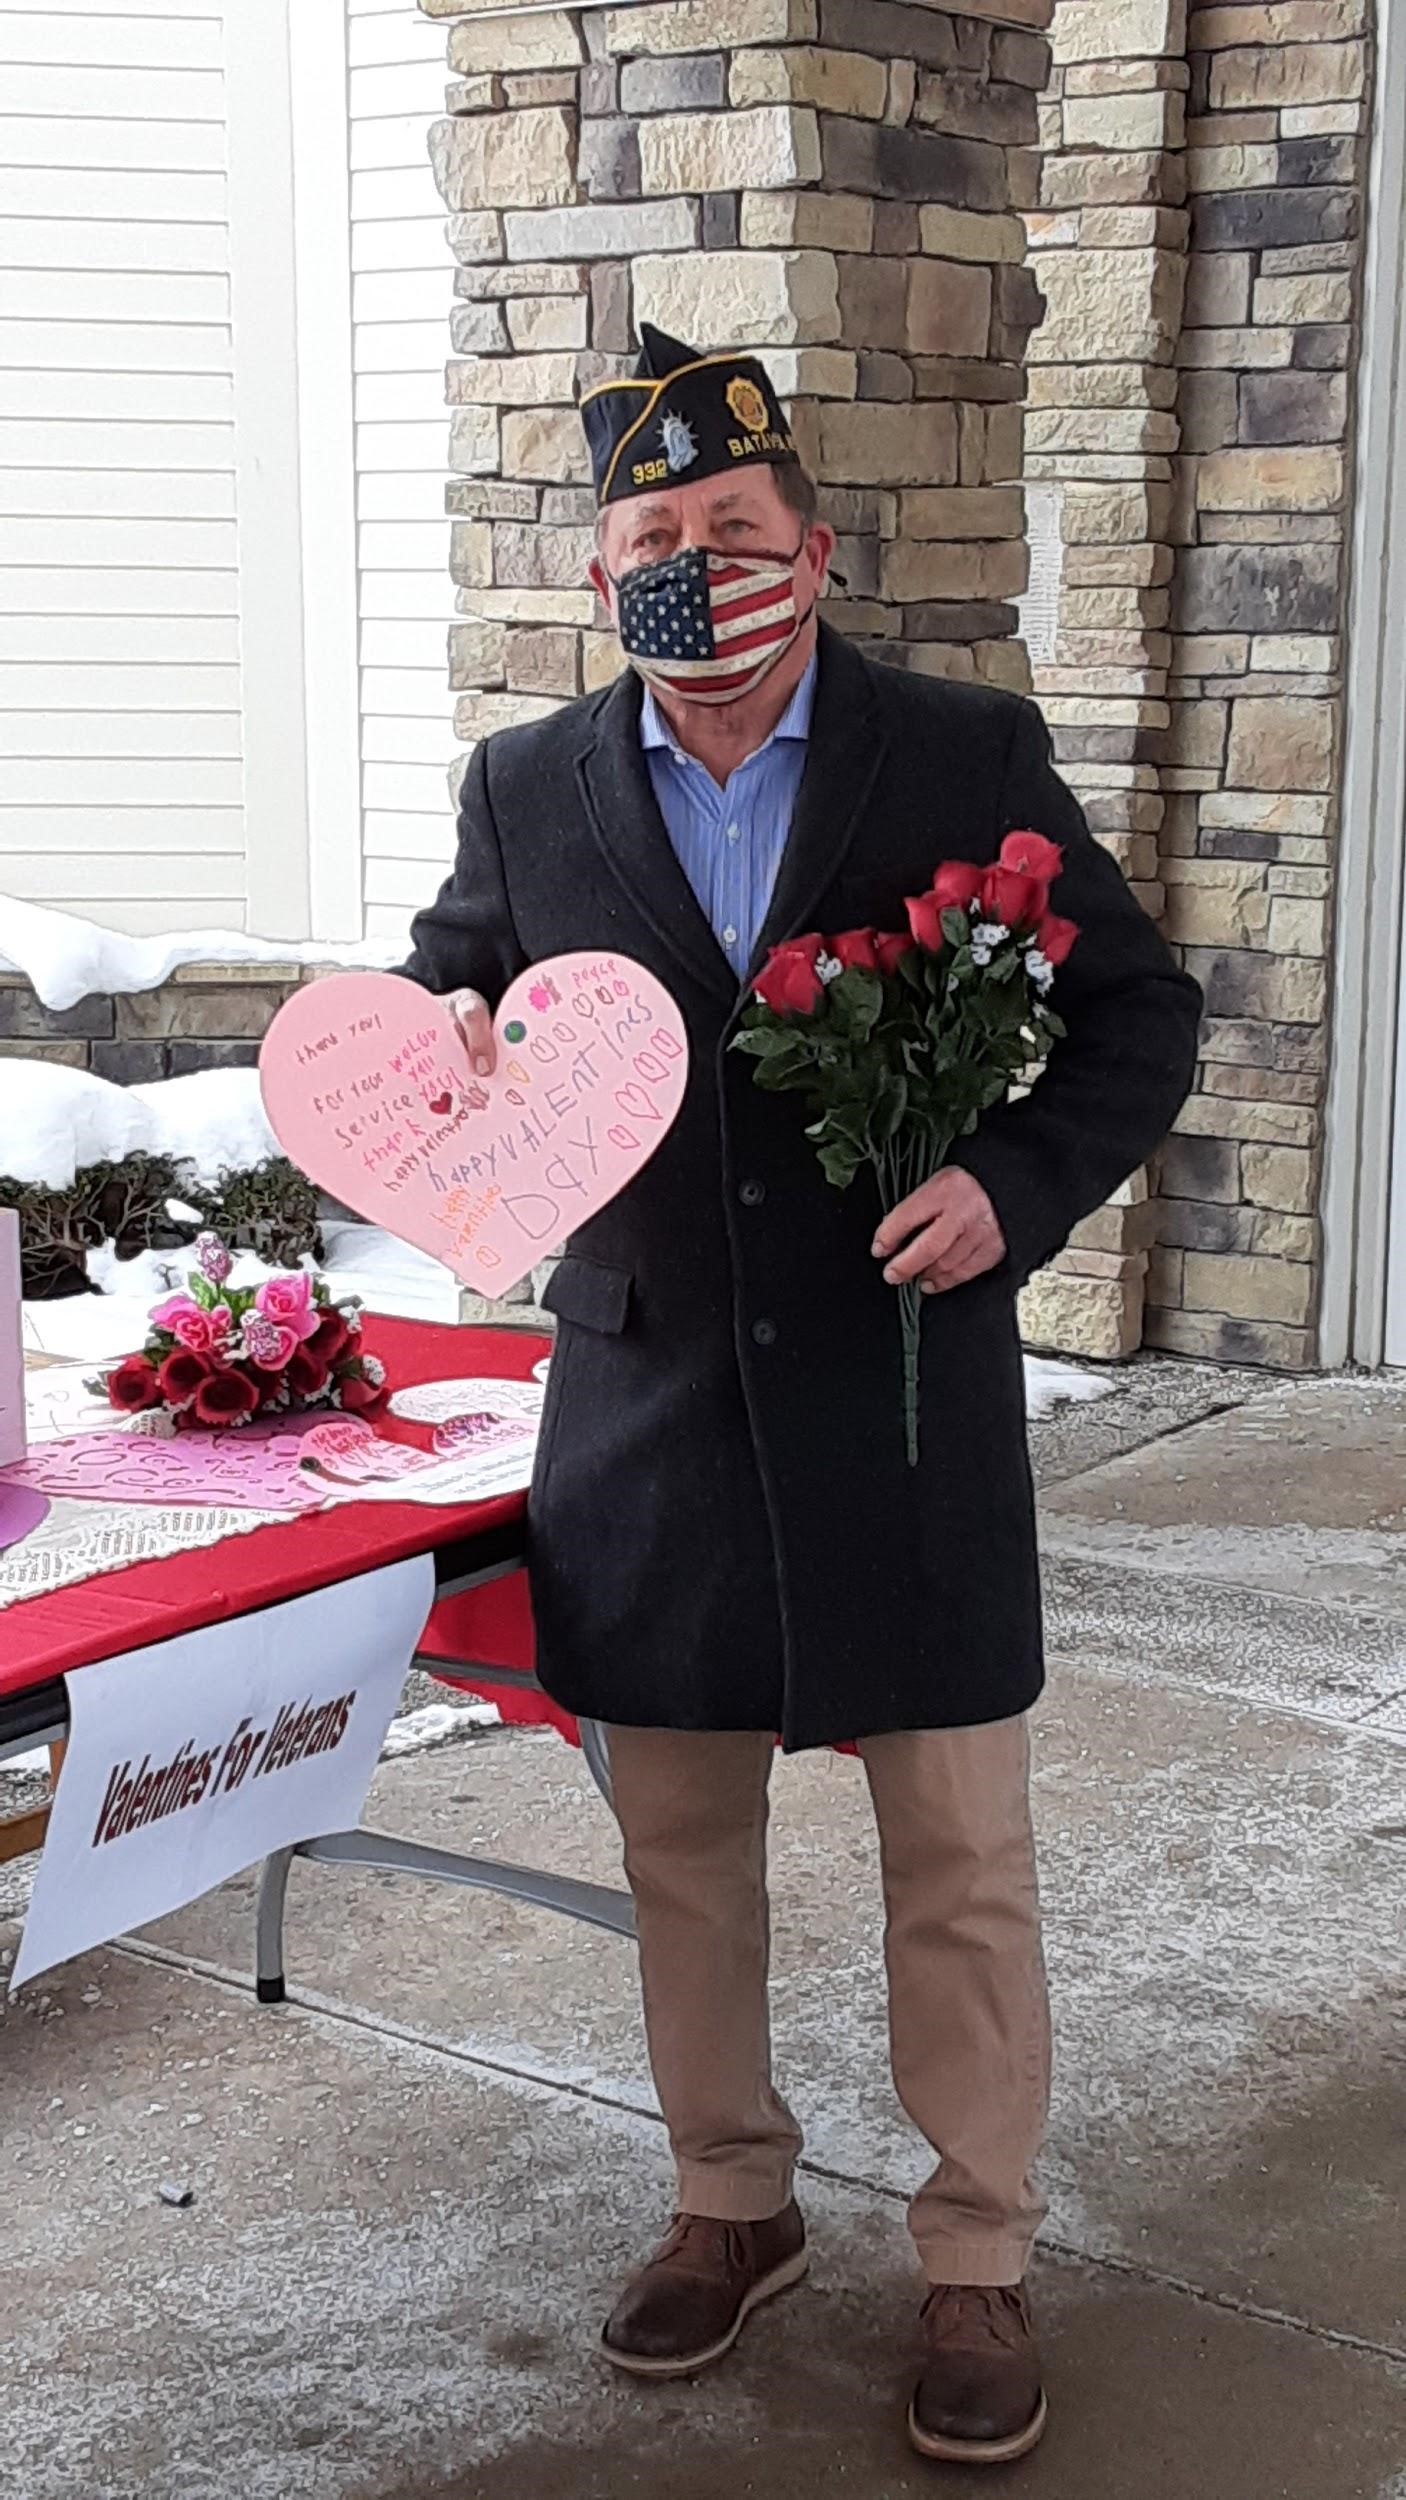 Hawley drops off valentines at the New York State Veterans’ Home in Batavia on Feb. 11, 2021